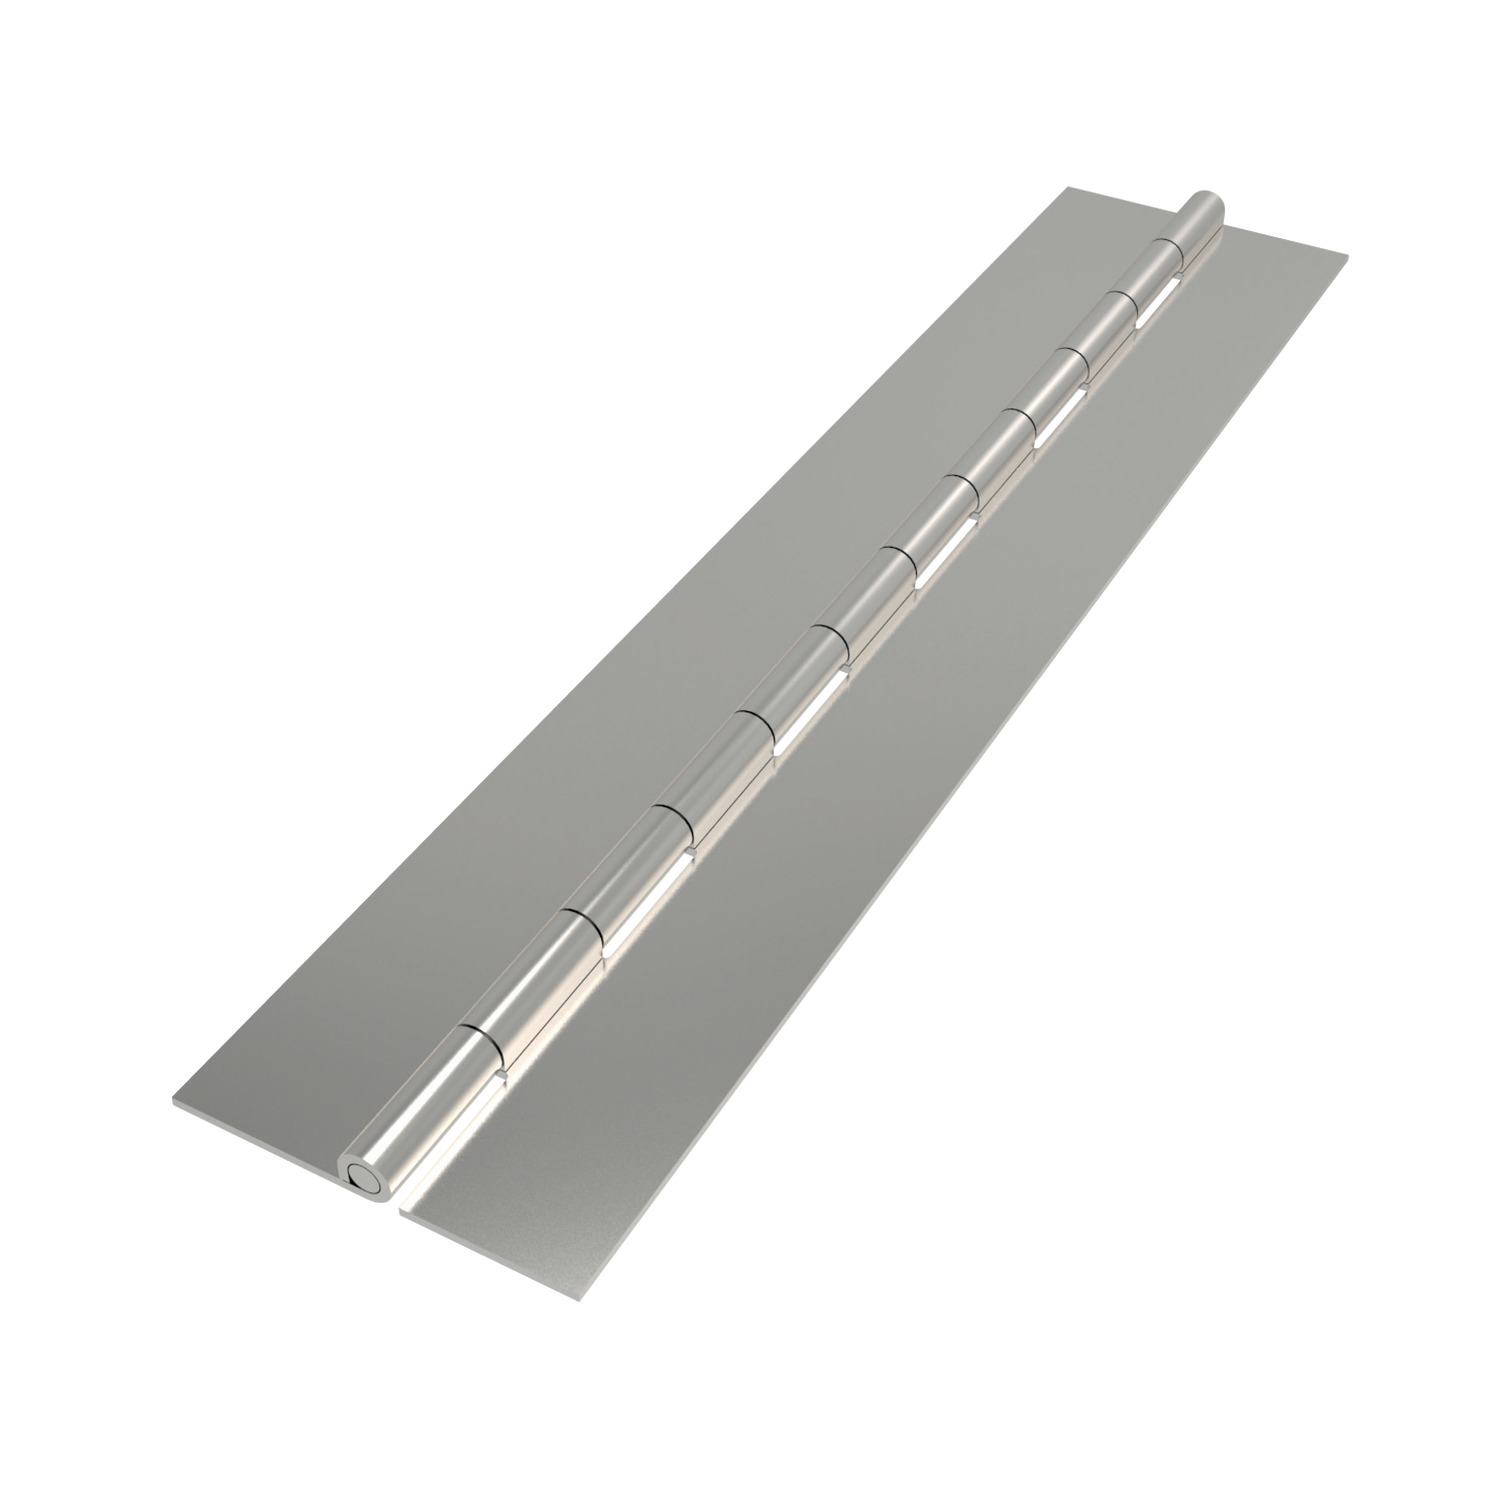 S0050.AC0382 Surface Mount - Piano Hinges Weld on - Stainless steel. 1000 x 38